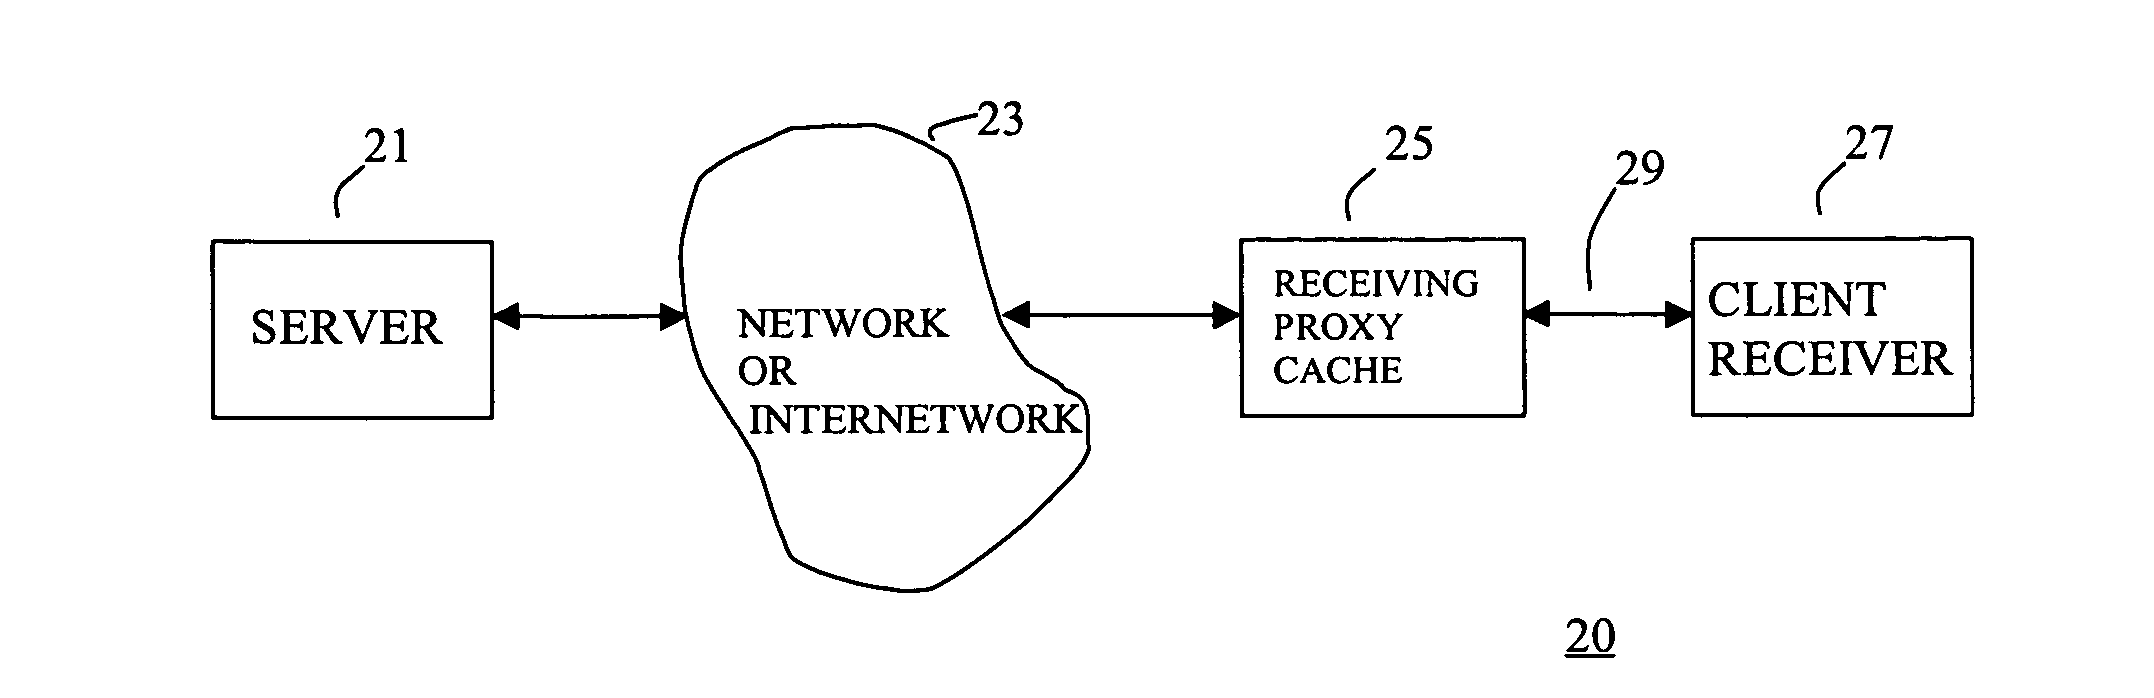 Method and system for transporting data over network